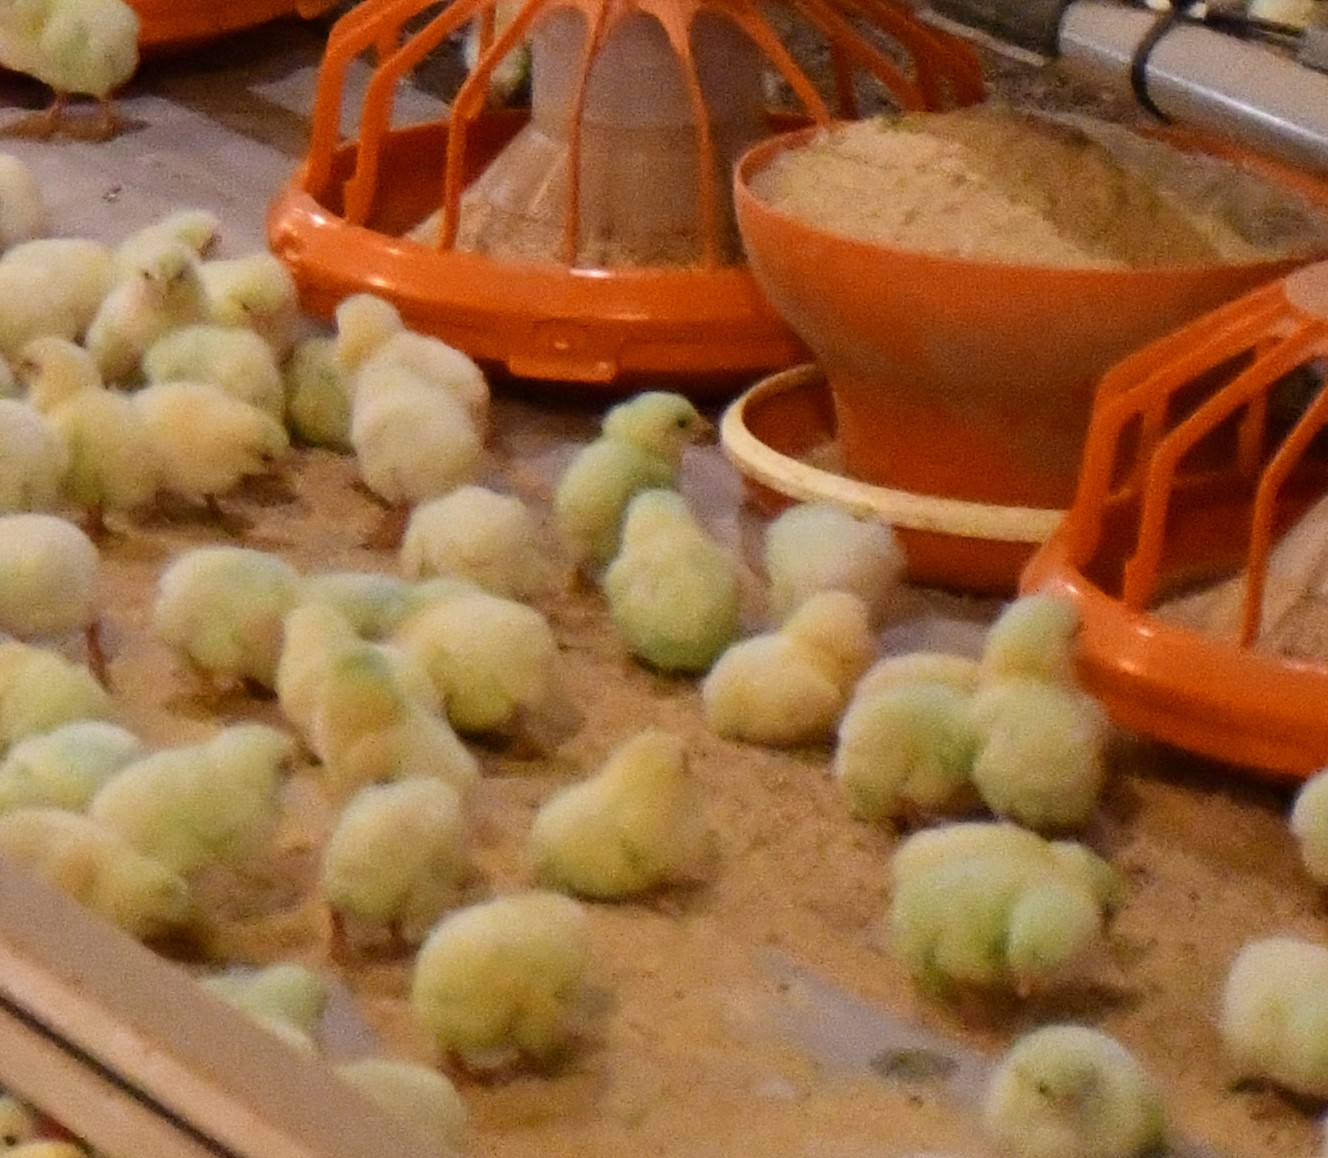 The cyclic nature of chicks